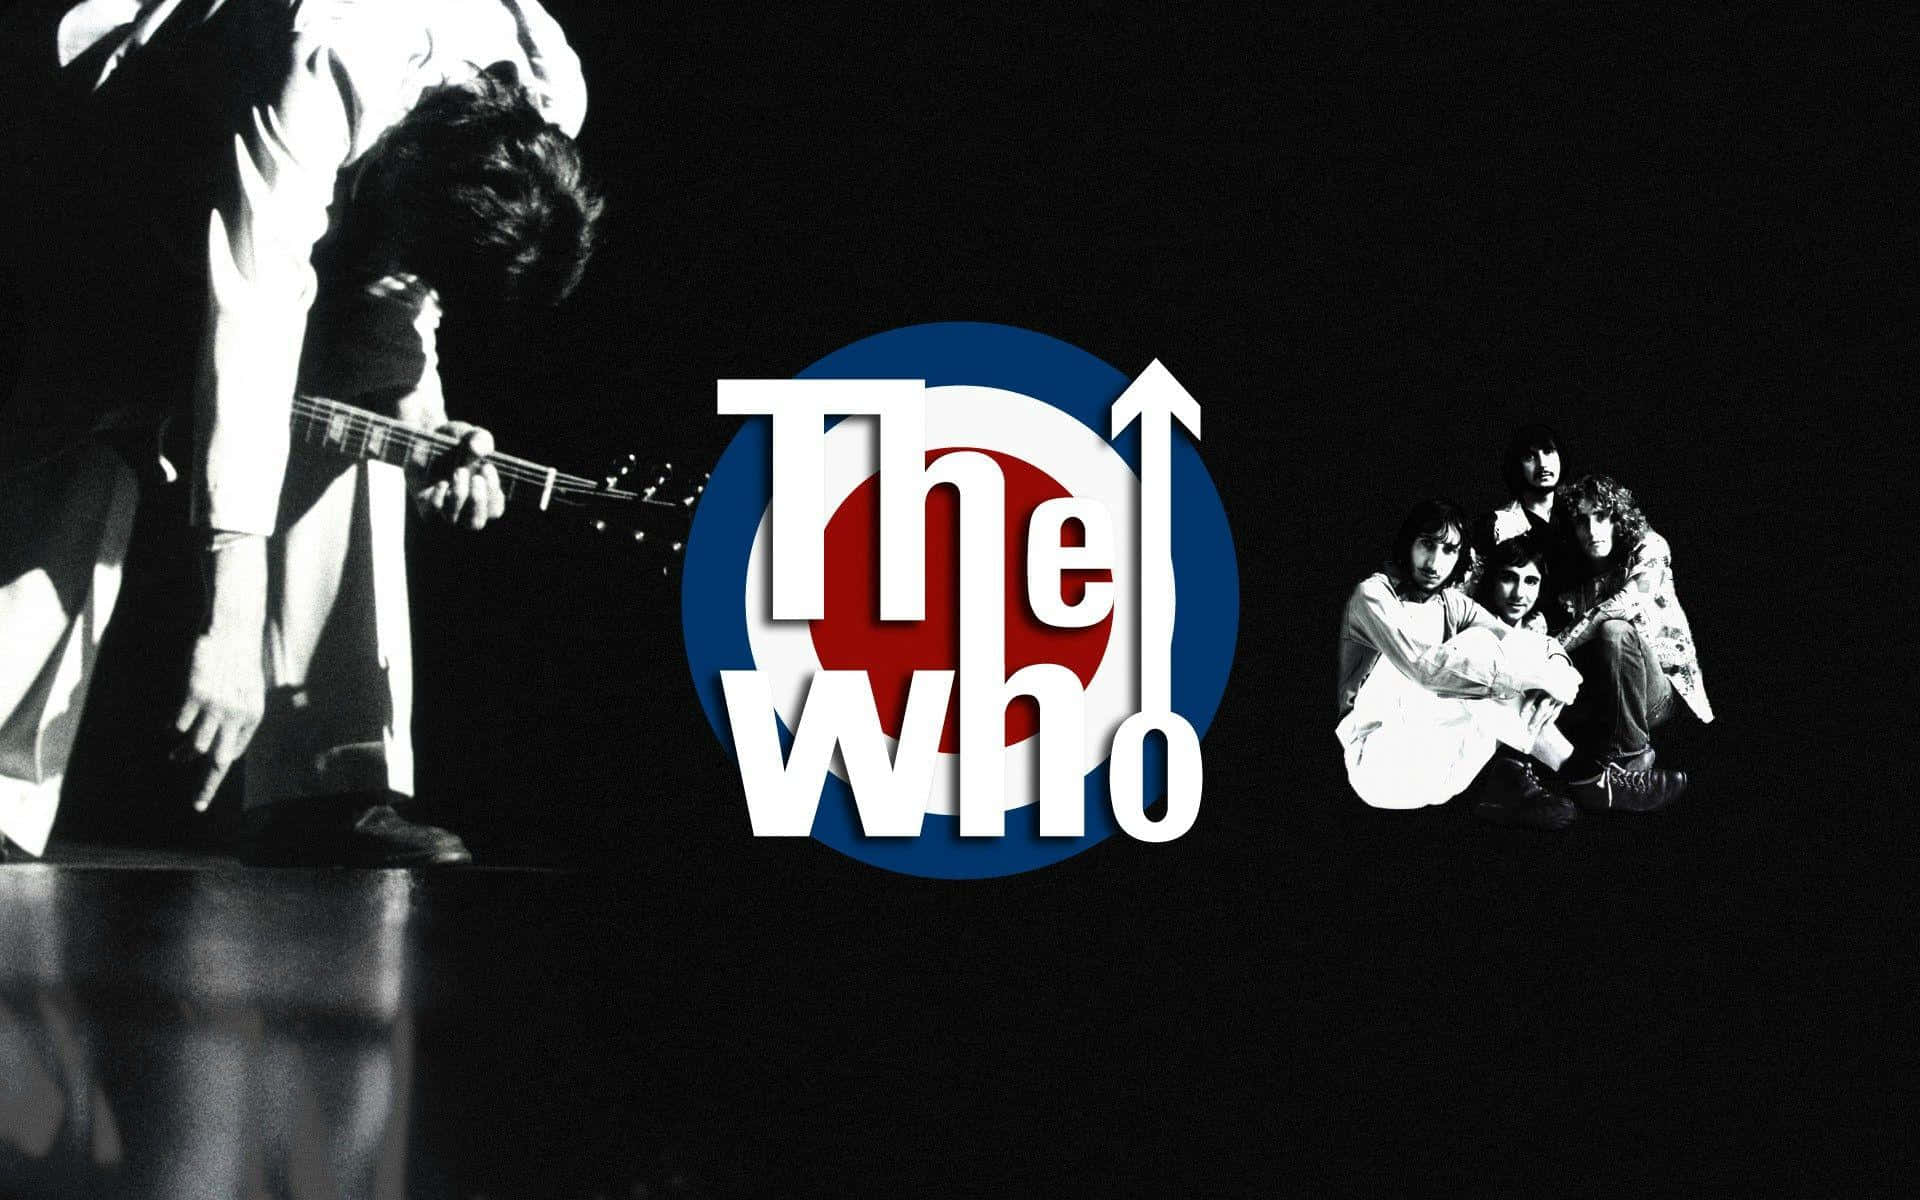 Iconic Band The Who Performanceand Logo Background